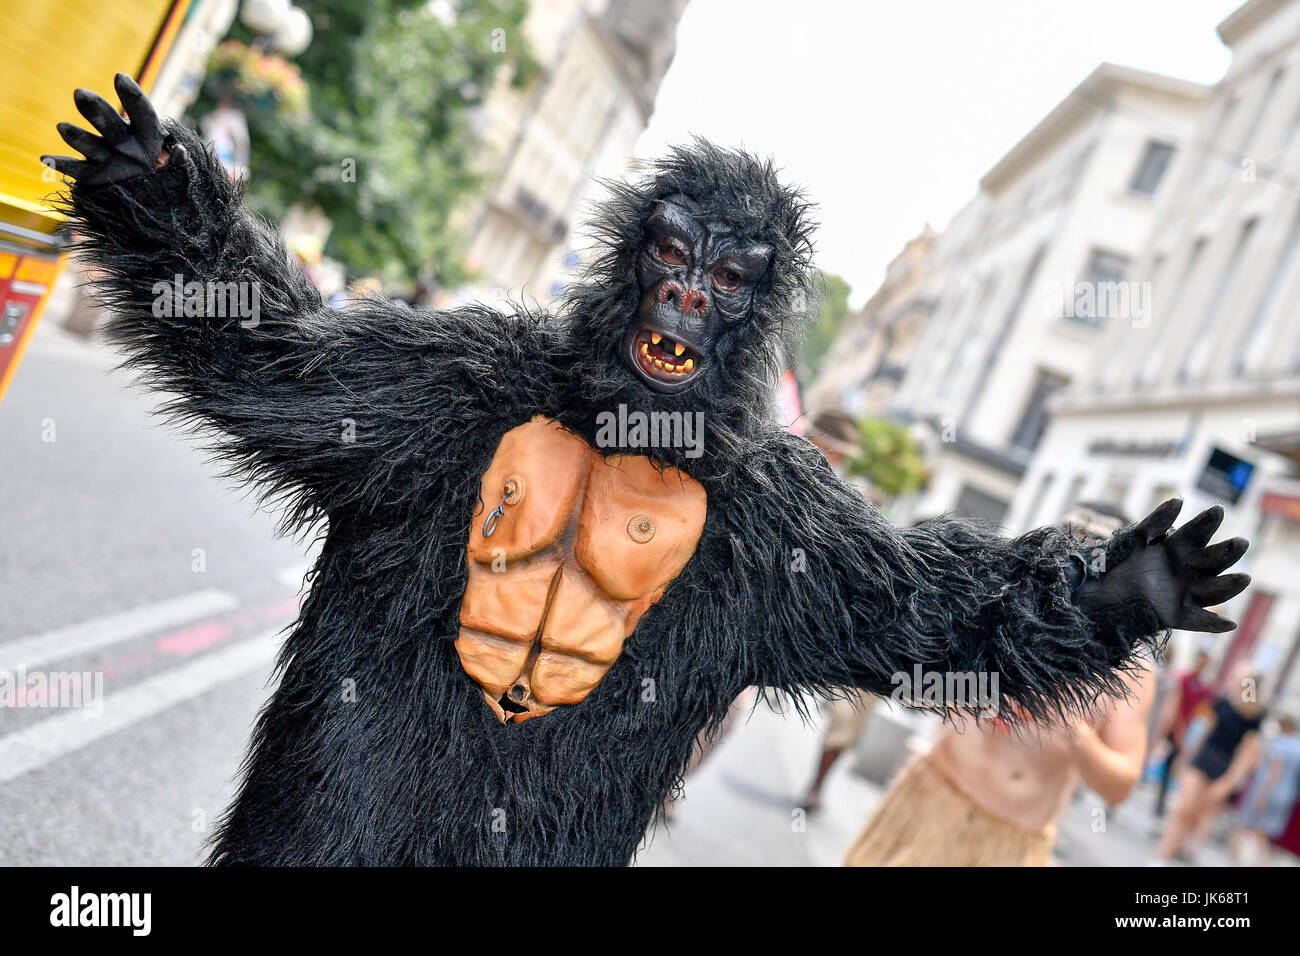 Avignon, France. 21st July, 2017. An artist performs in the street in Avignon, France, on July 21, 2017. Situated in the Vaucluse Department, Avignon is one of the most attracting tourist destinations in southern France. It is now famous for the annual Festival d'Avignon. Credit: Chen Yichen/Xinhua/Alamy Live News Stock Photo